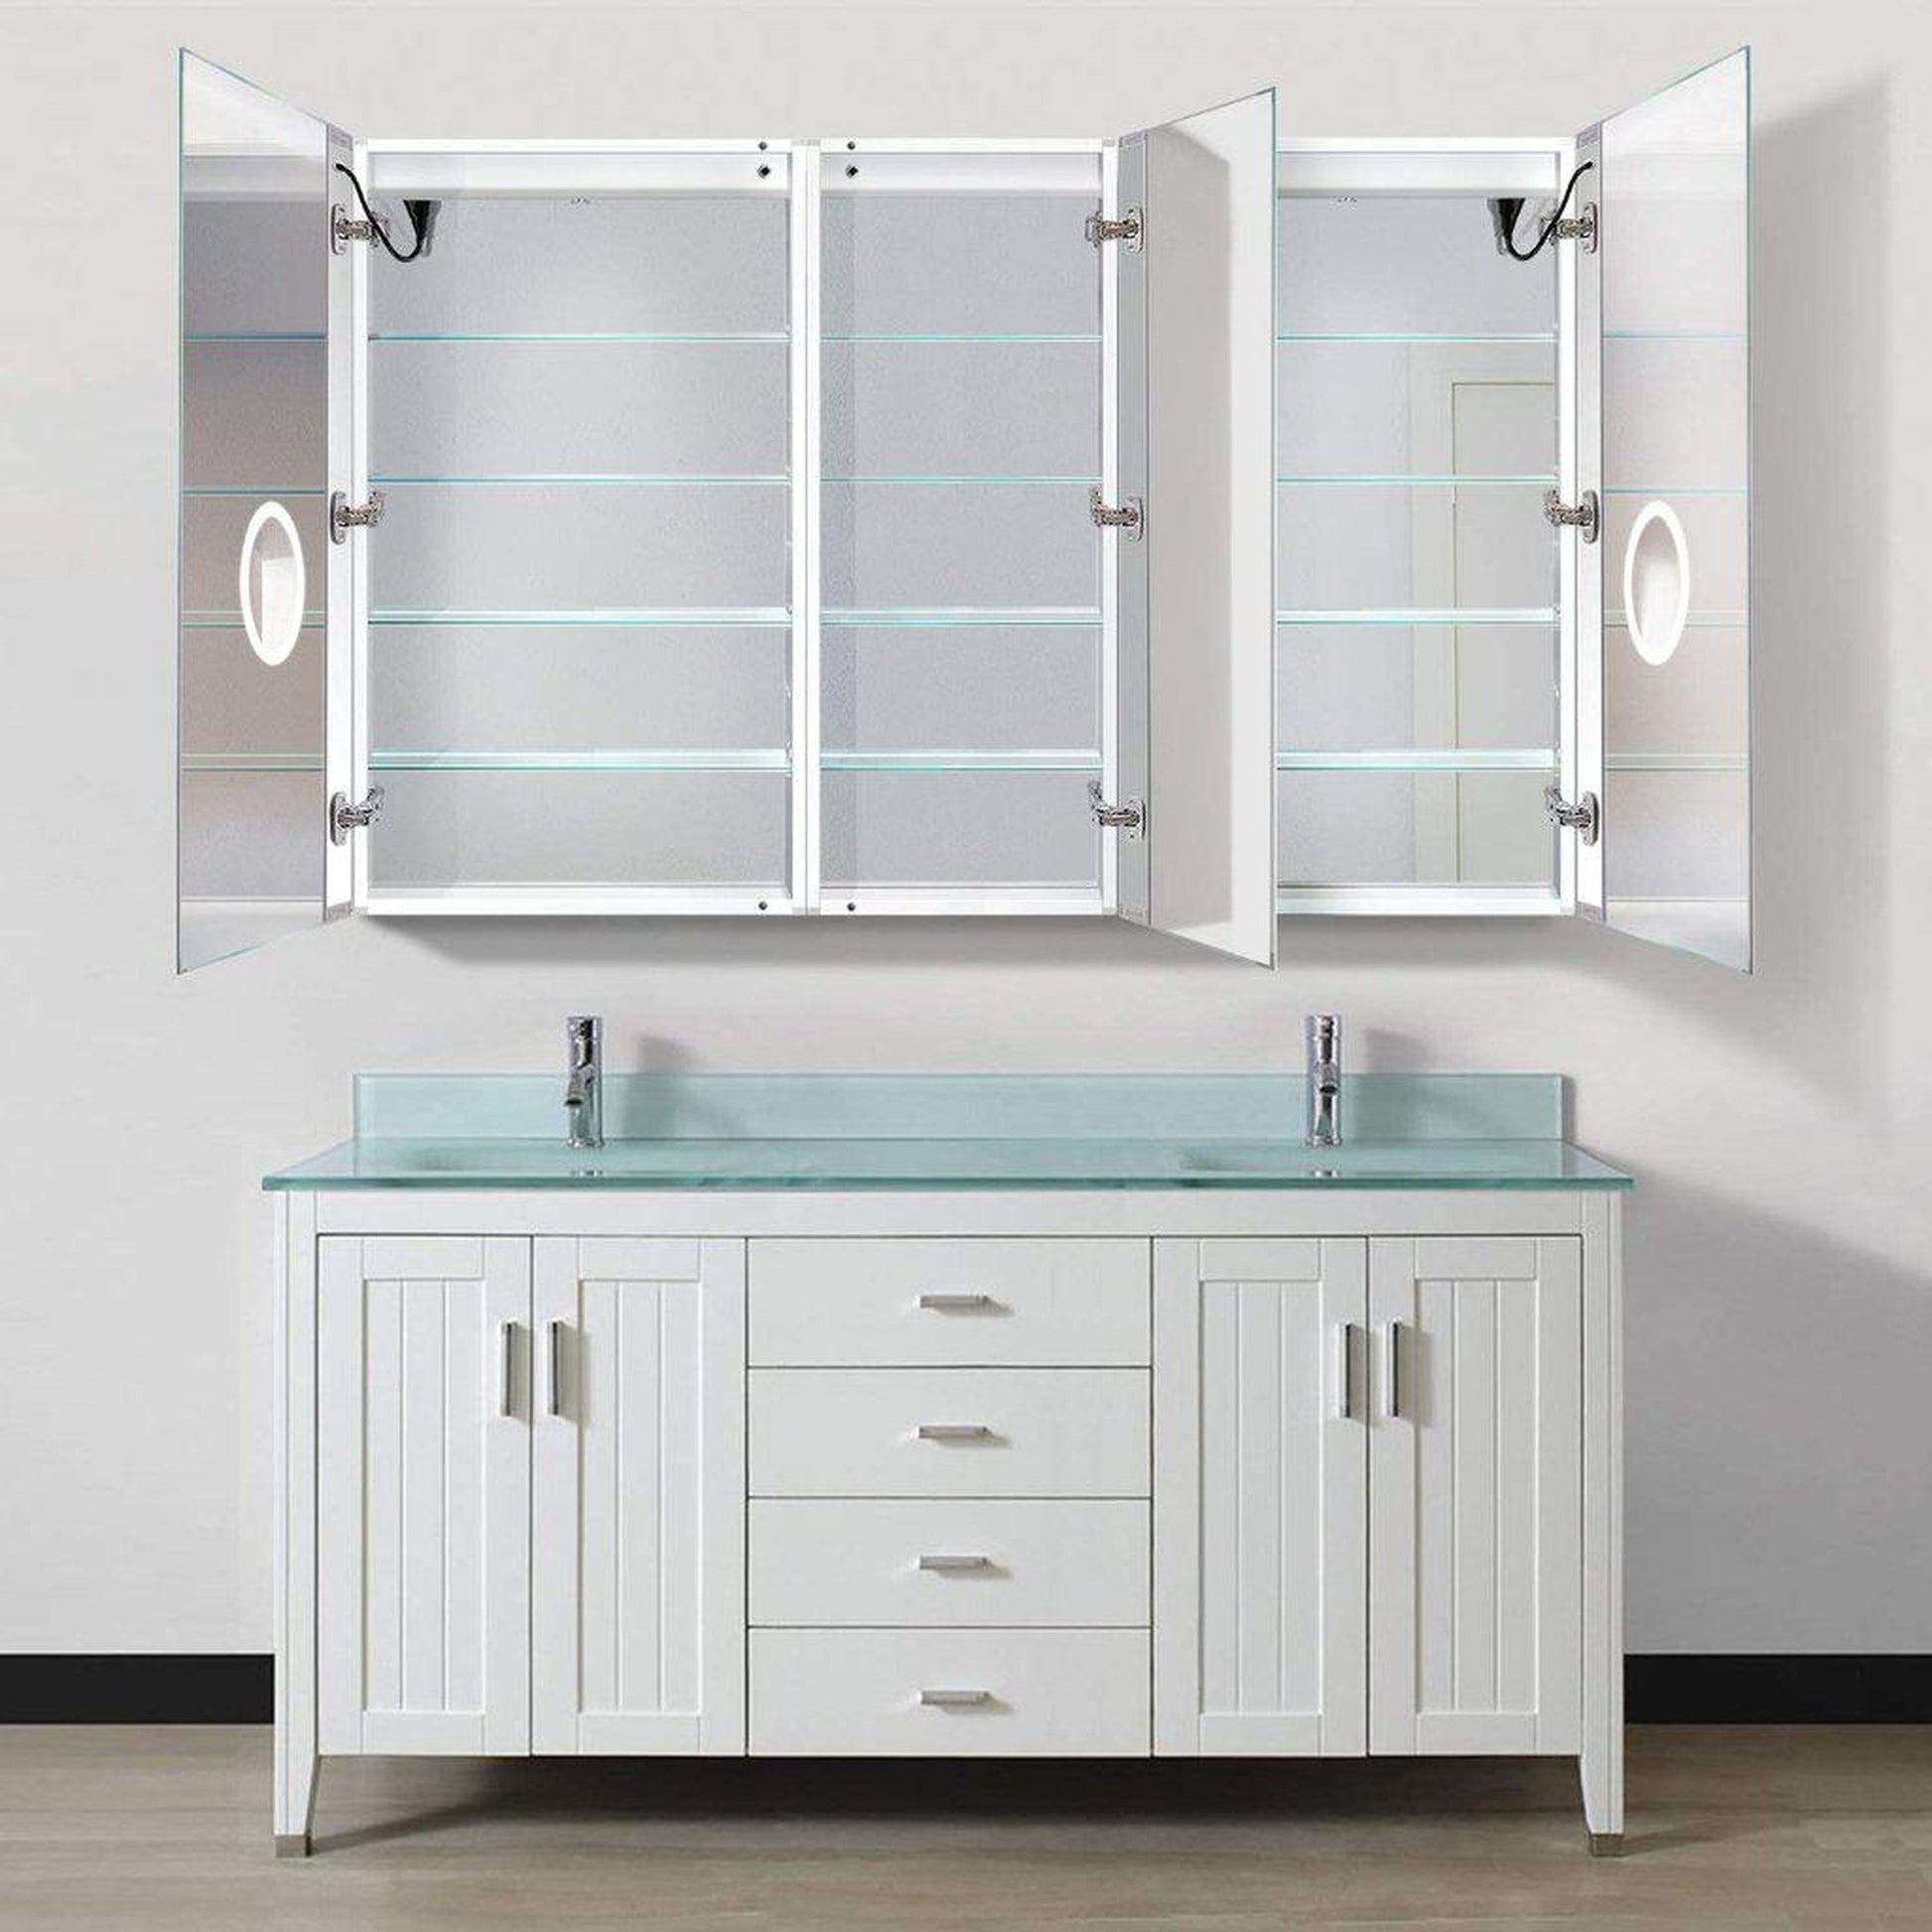 Krugg Reflections Svange 66" x 42" 5000K Double Tri-View Left-Right-Right Opening Recessed/Surface-Mount Illuminated Silver Backed LED Medicine Cabinet Mirror With Built-in Defogger, Dimmer and Electrical Outlet